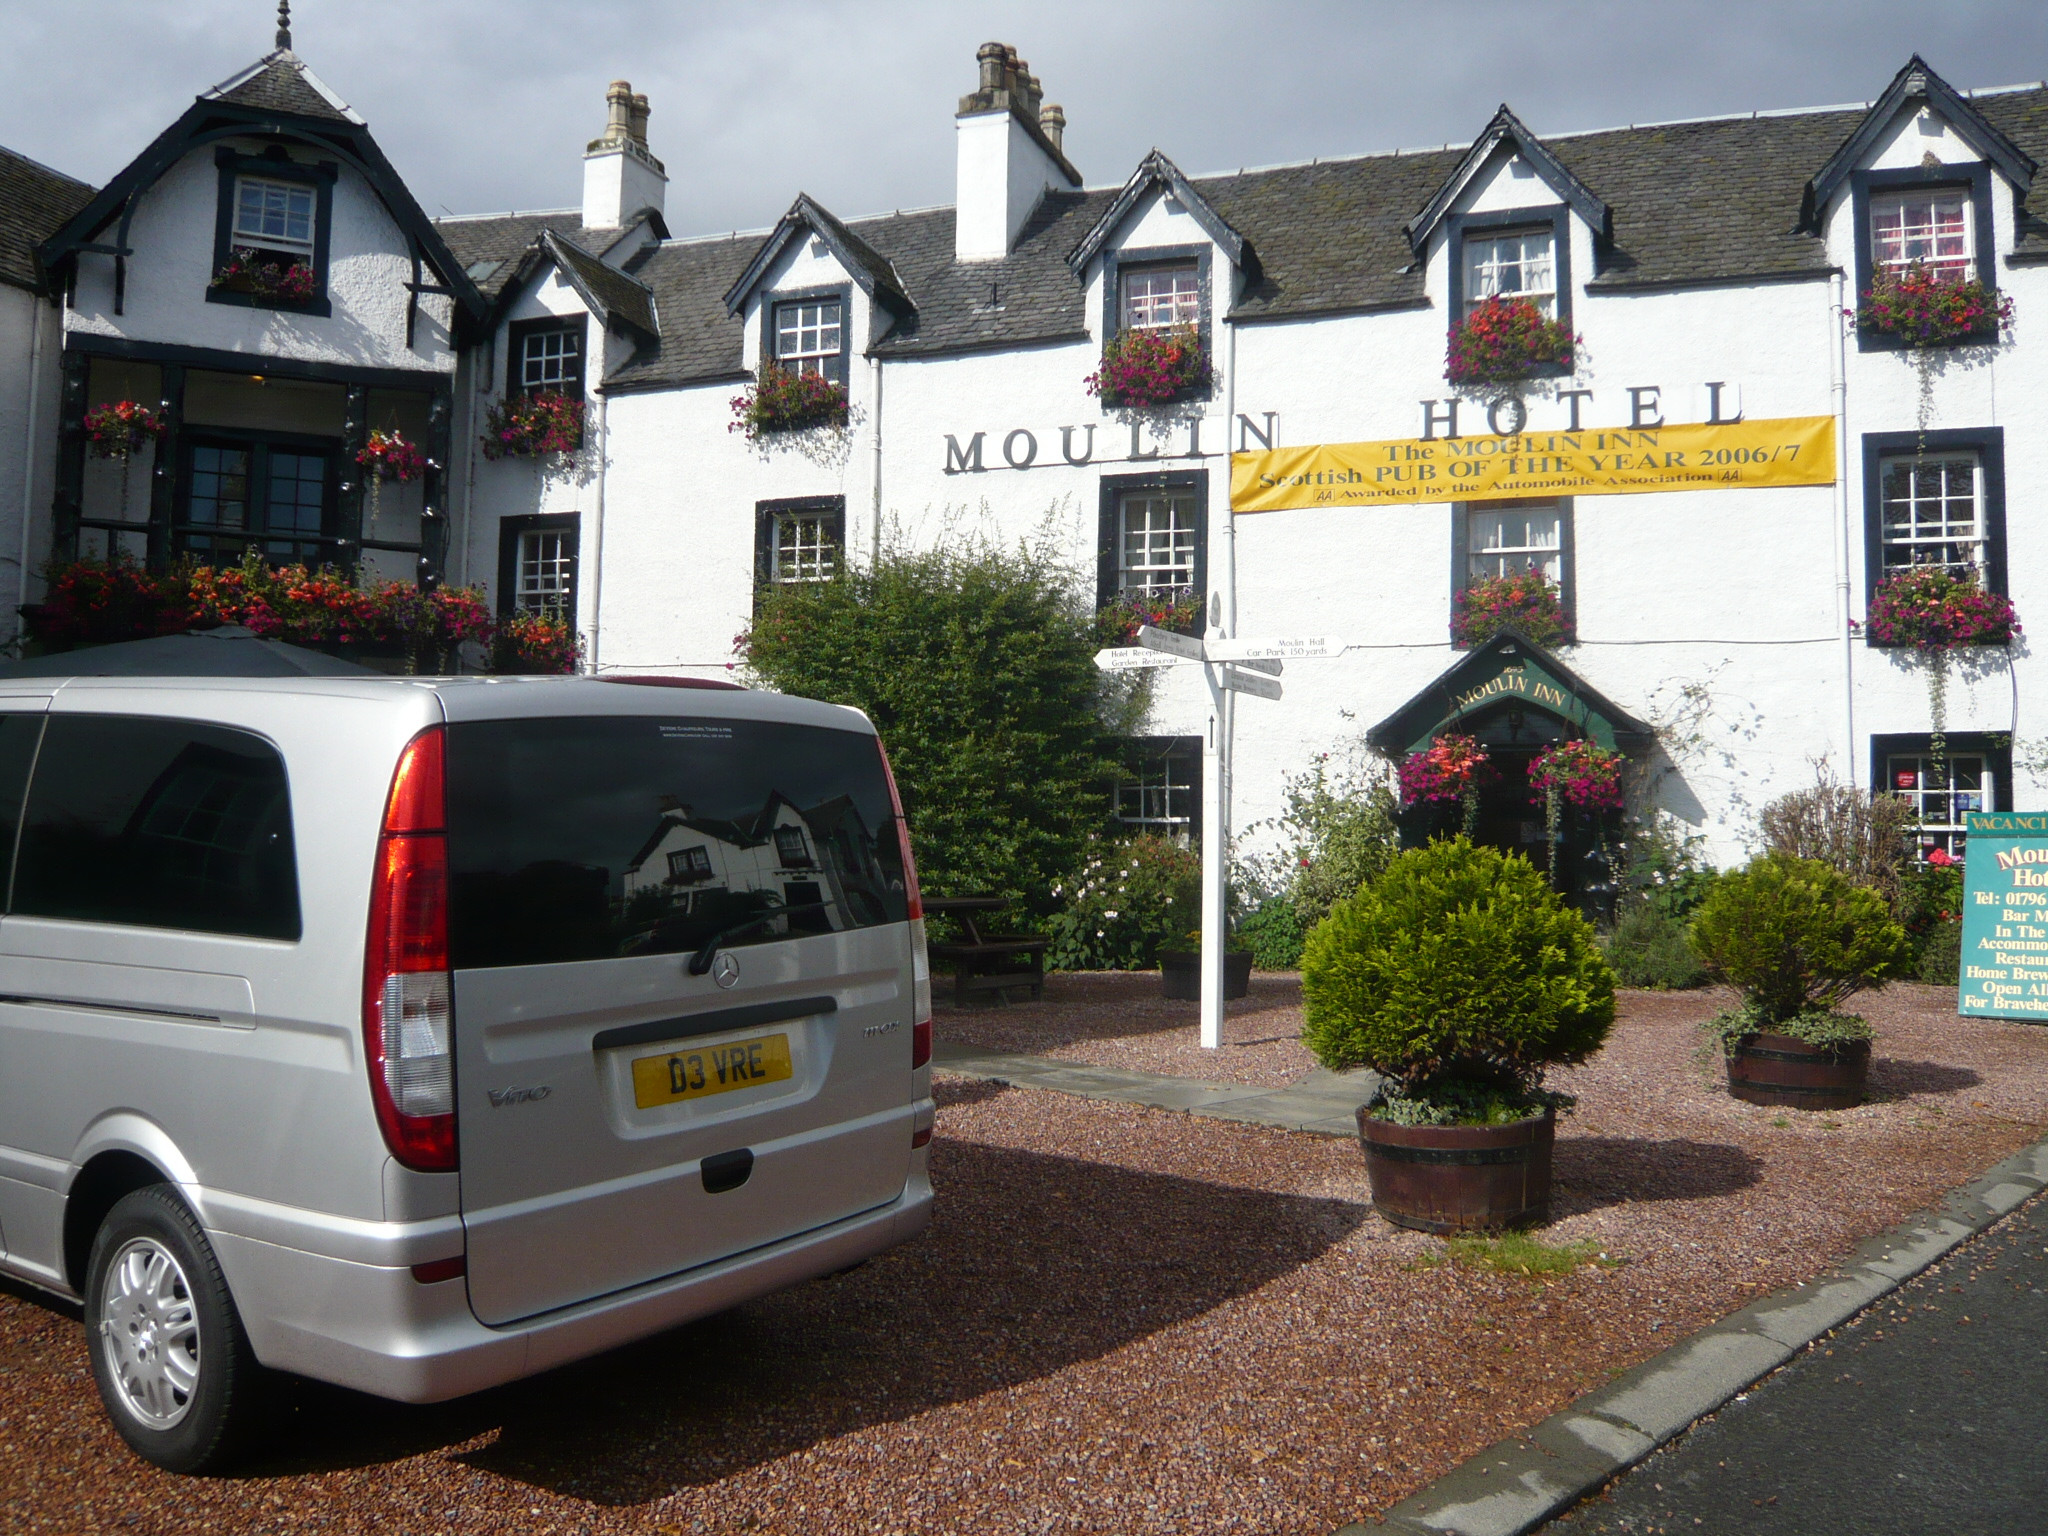 A stop for lunch in a relaxed atmosphere at one of our favourite Scottish Inn's